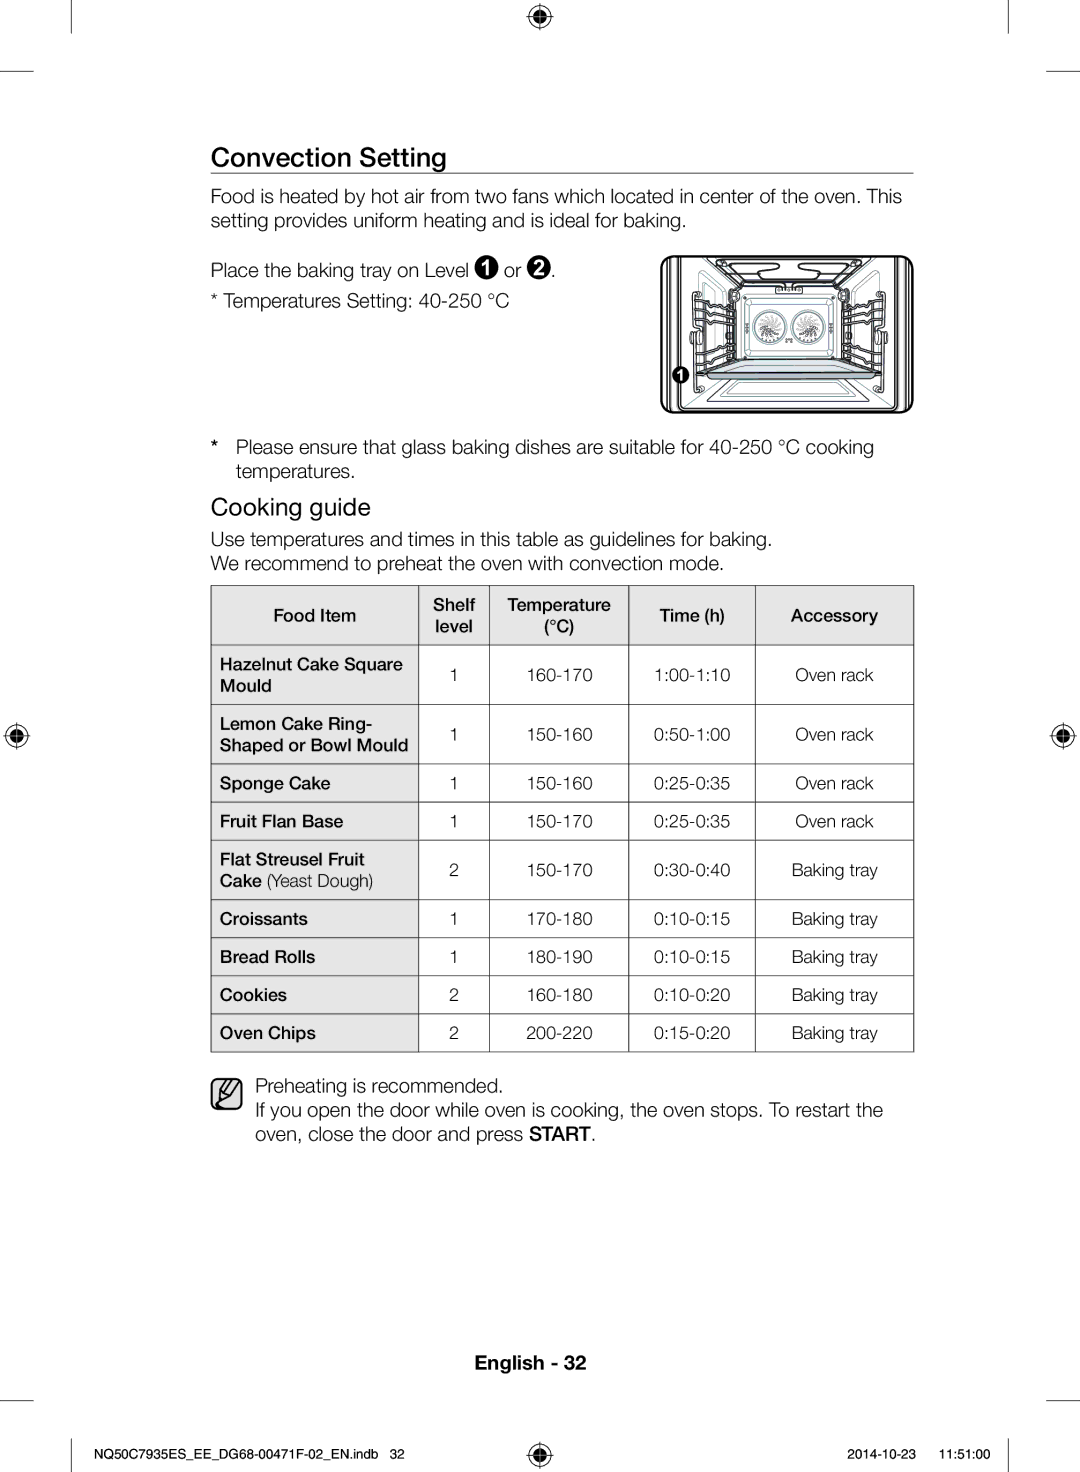 Samsung NQ50C7935ES/EE manual Convection Setting, Cooking guide 